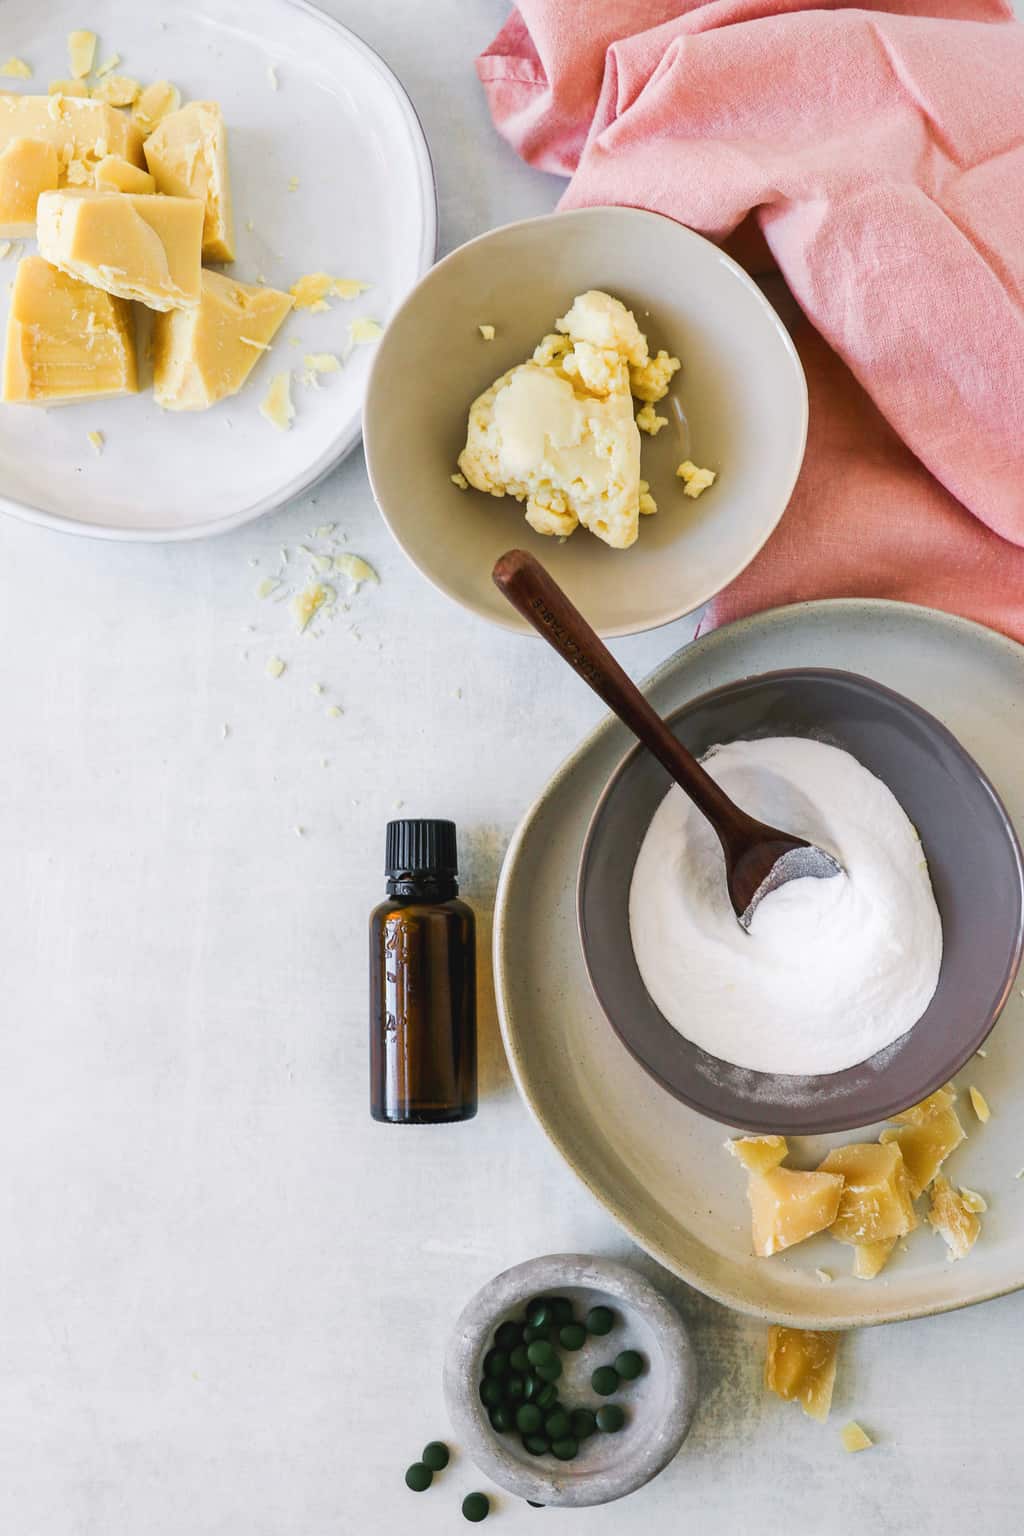 Ingredients for cocoa butter bath melt recipe